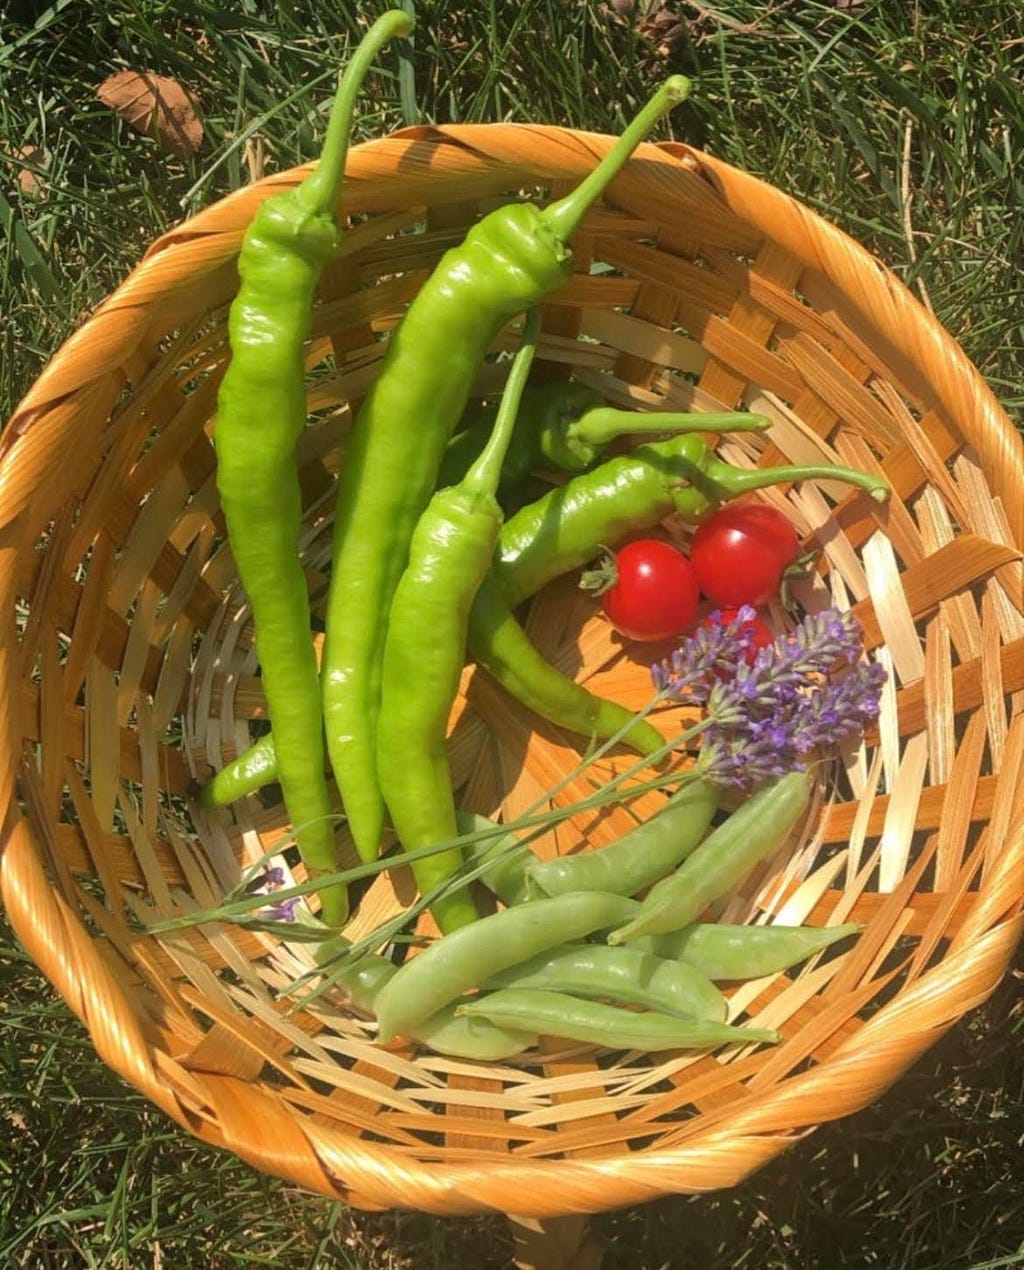 A basket of green chilies, cherry tomatoes, sweet peas, and lavender flowers harvested from the garden.